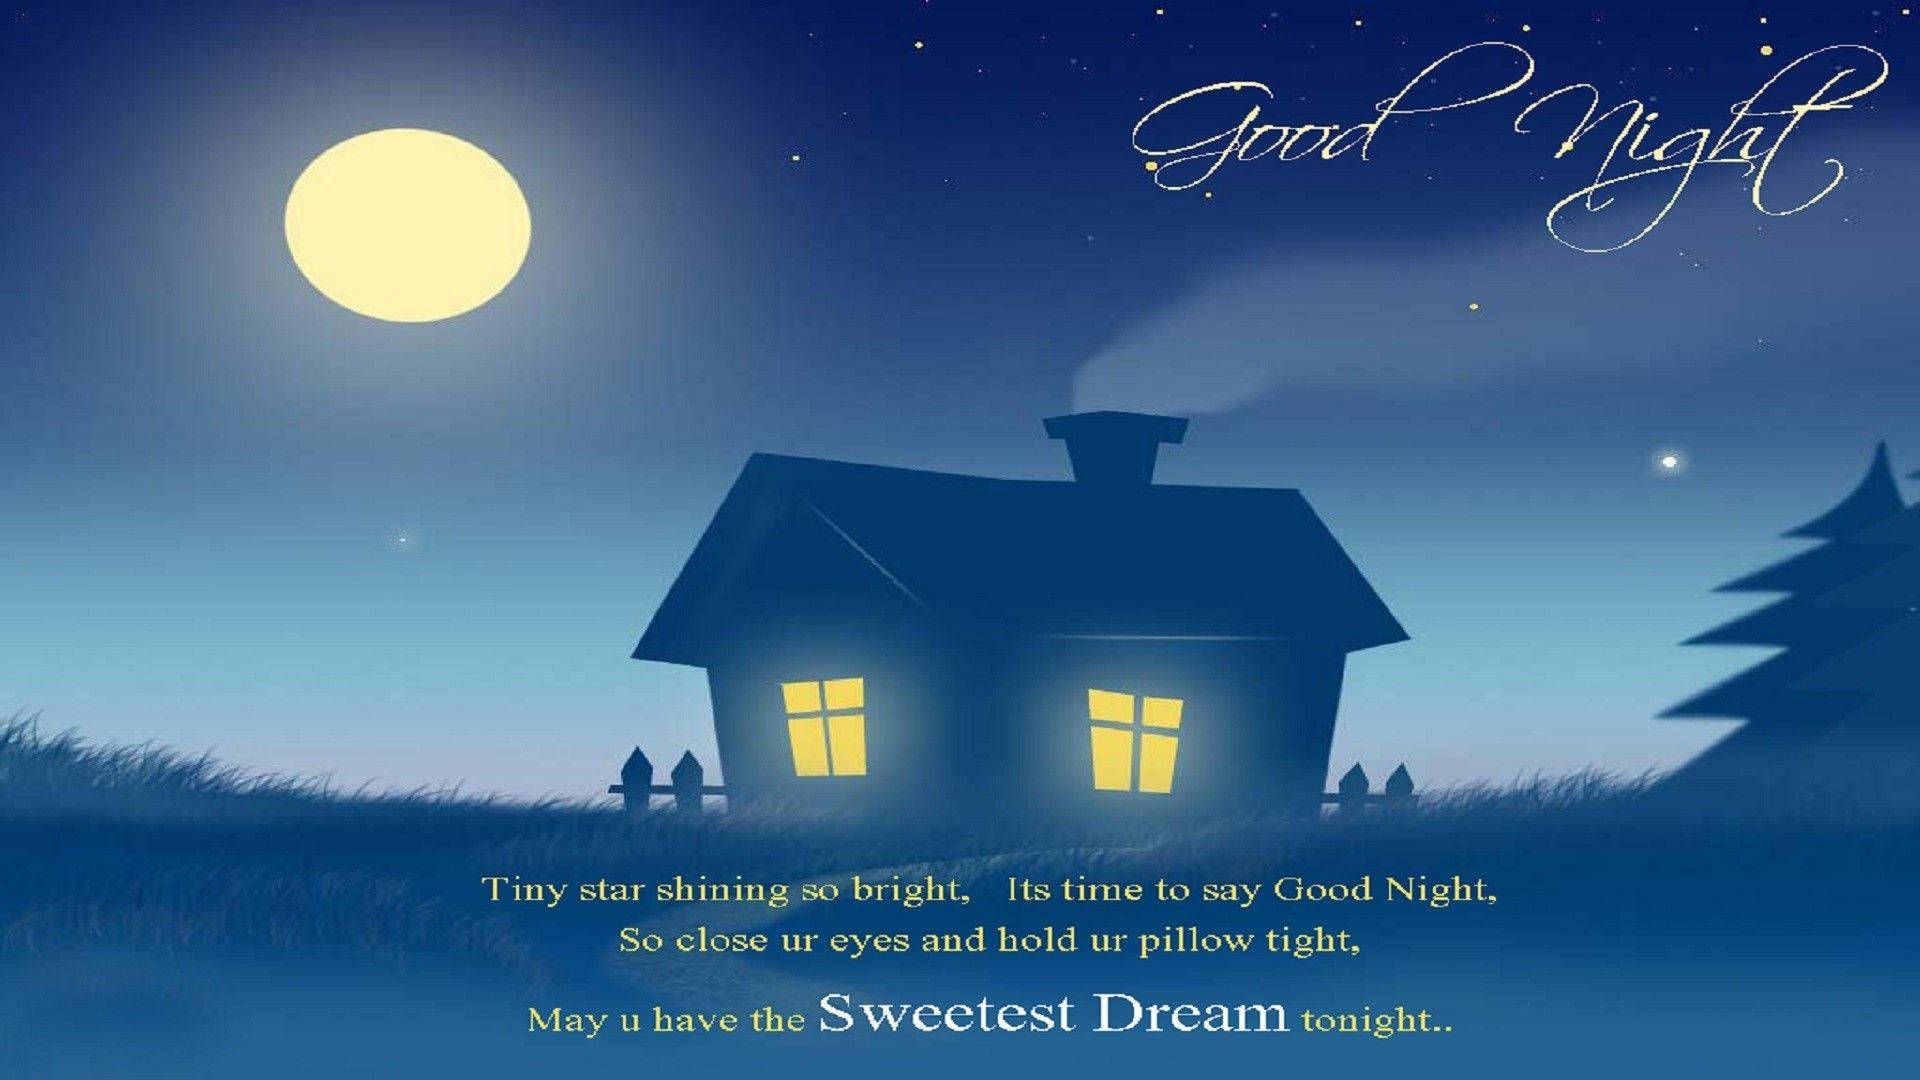 A Peaceful Night In A Cozy House - Sweet Dreams Background